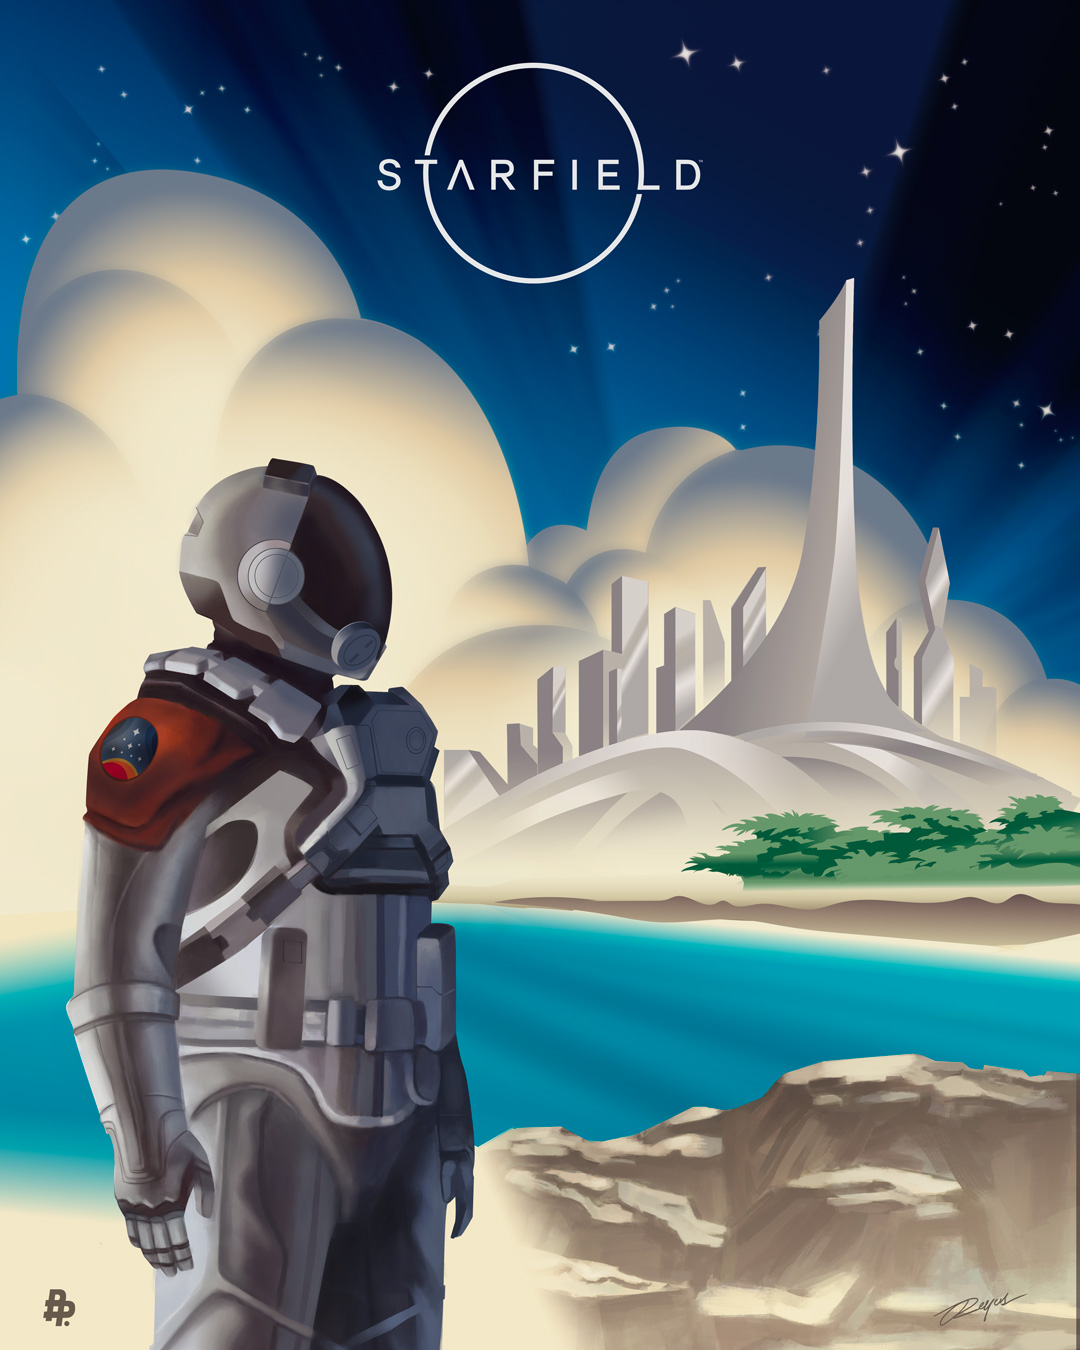 Official Starfield poster for Bethesda Game Studios by the Poster Posse